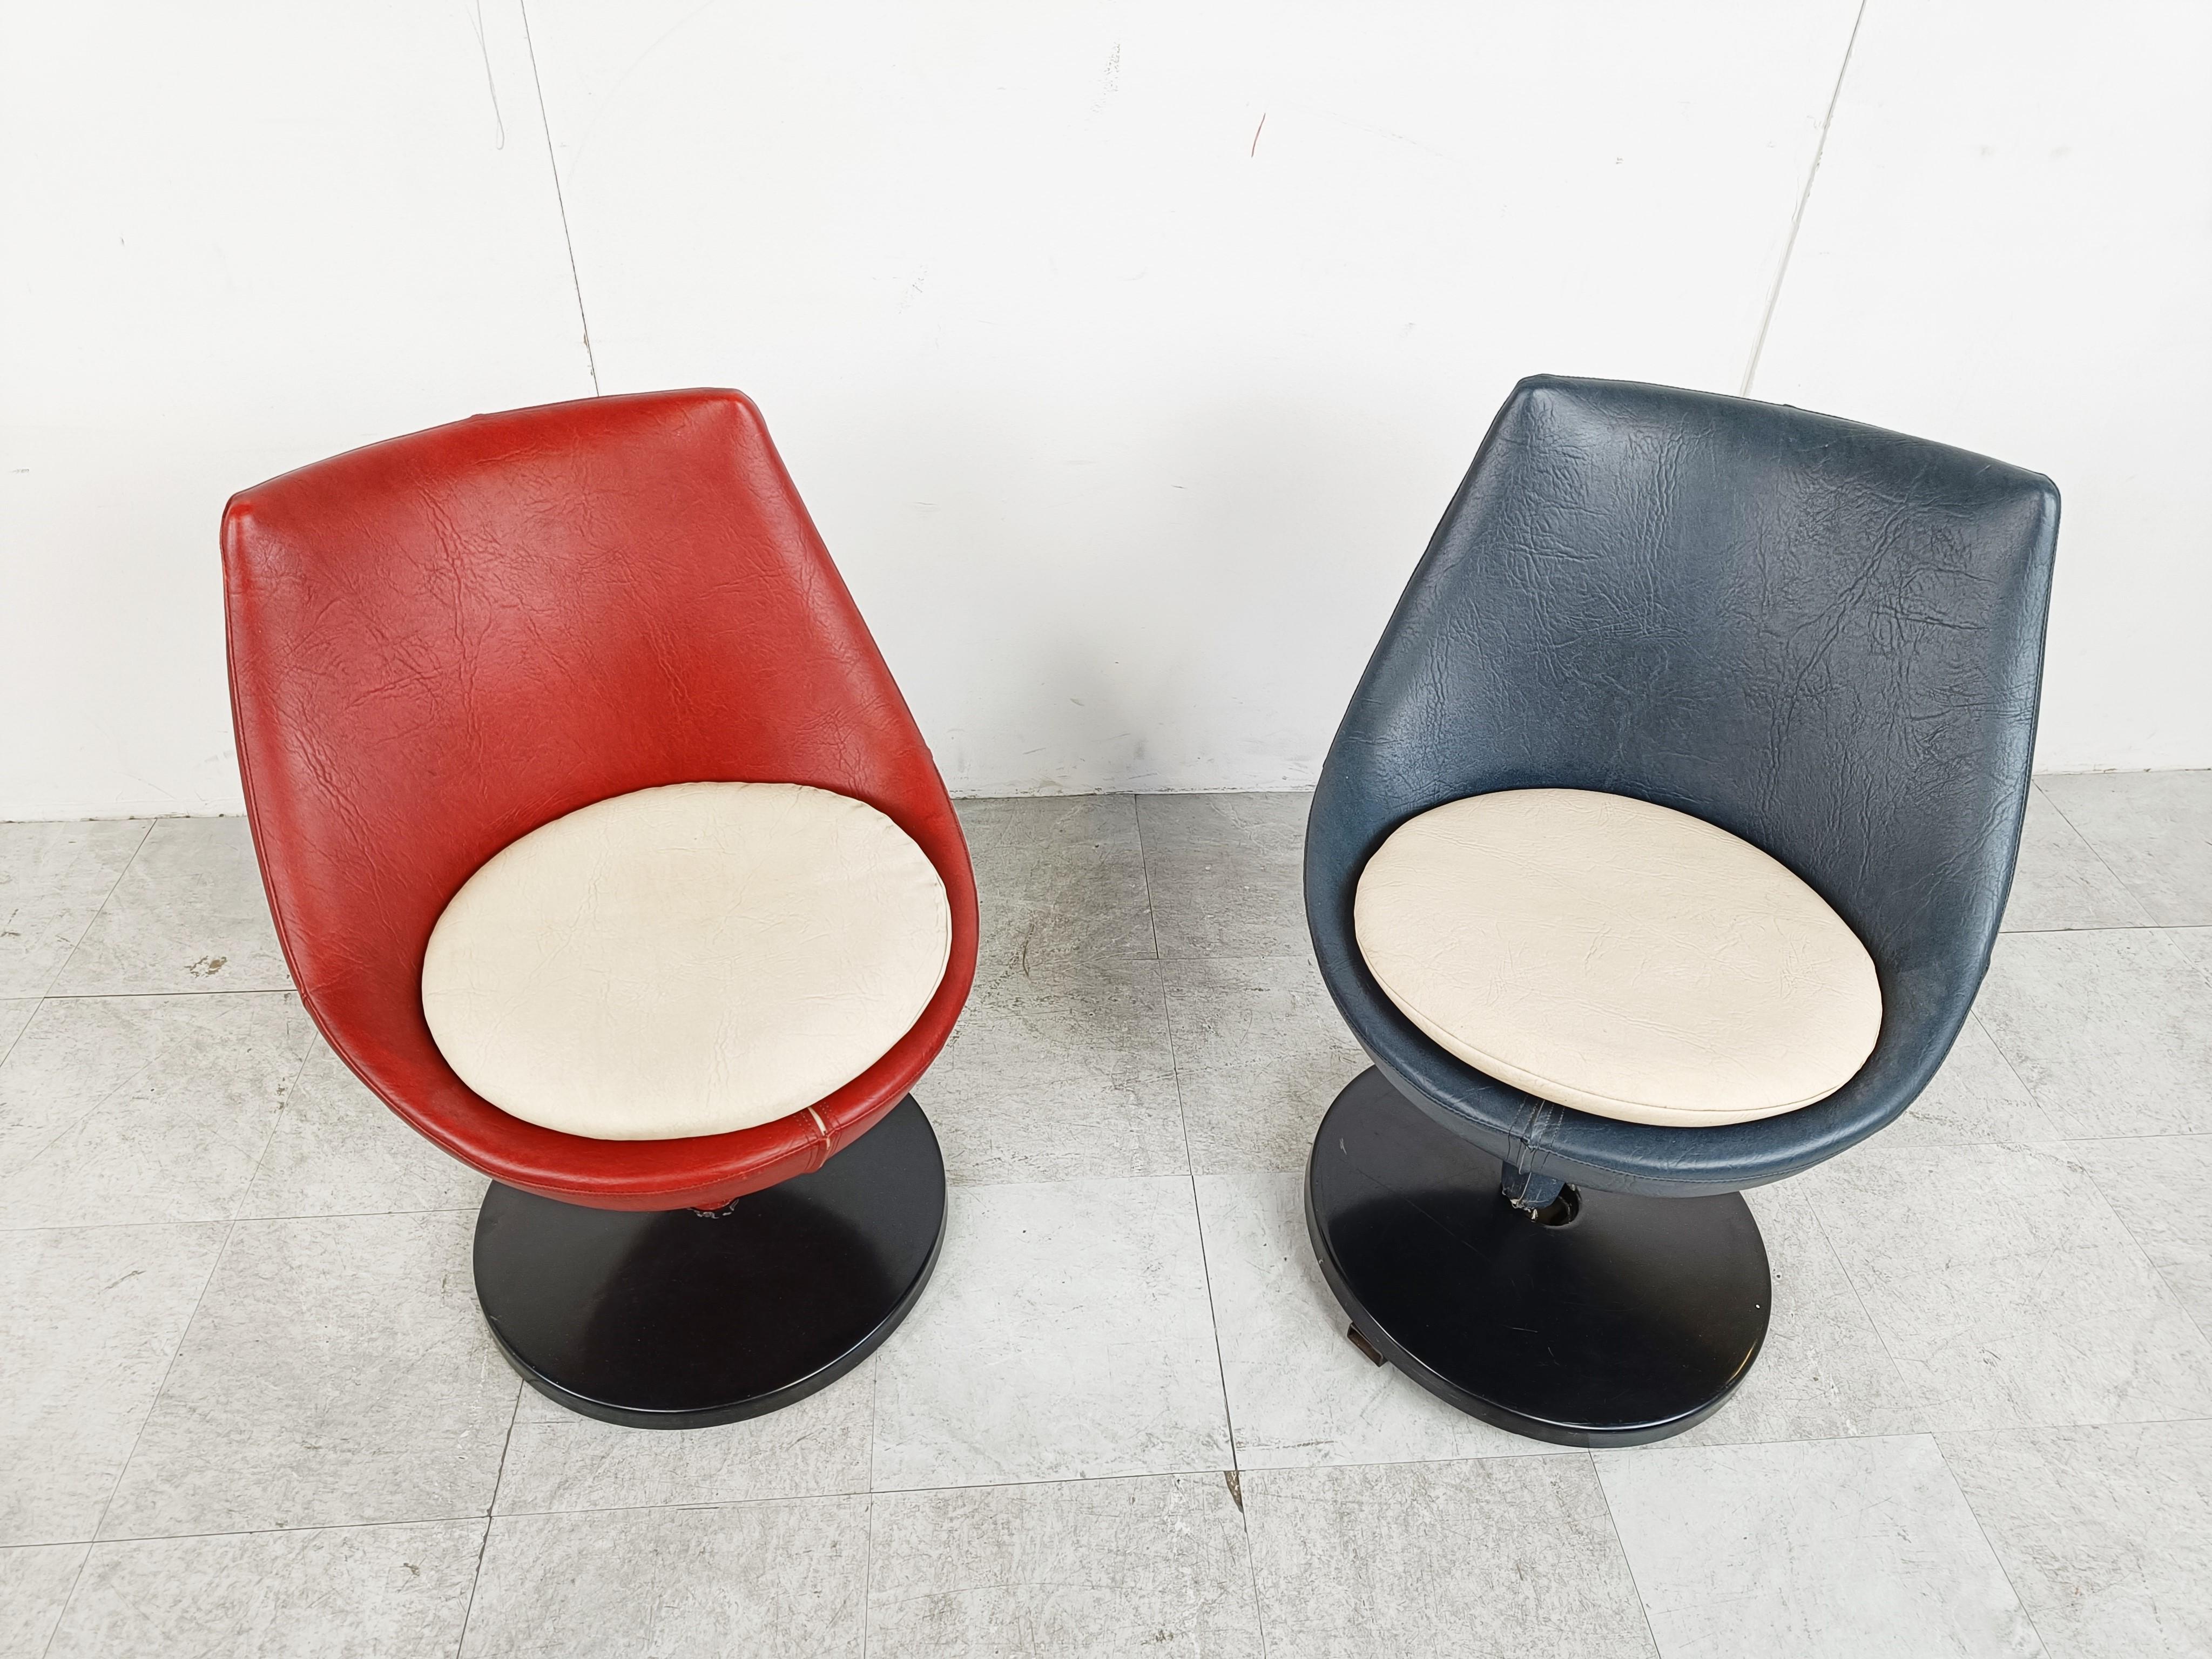 Pair of midcentury swivel chairs model 'Polaris' designed by Pierre Guariche for Meurop.

The chairs have a metal base with the intact original plastic cover and a with leatherette upholstered shell.

Good condition.

Beautiful timeless